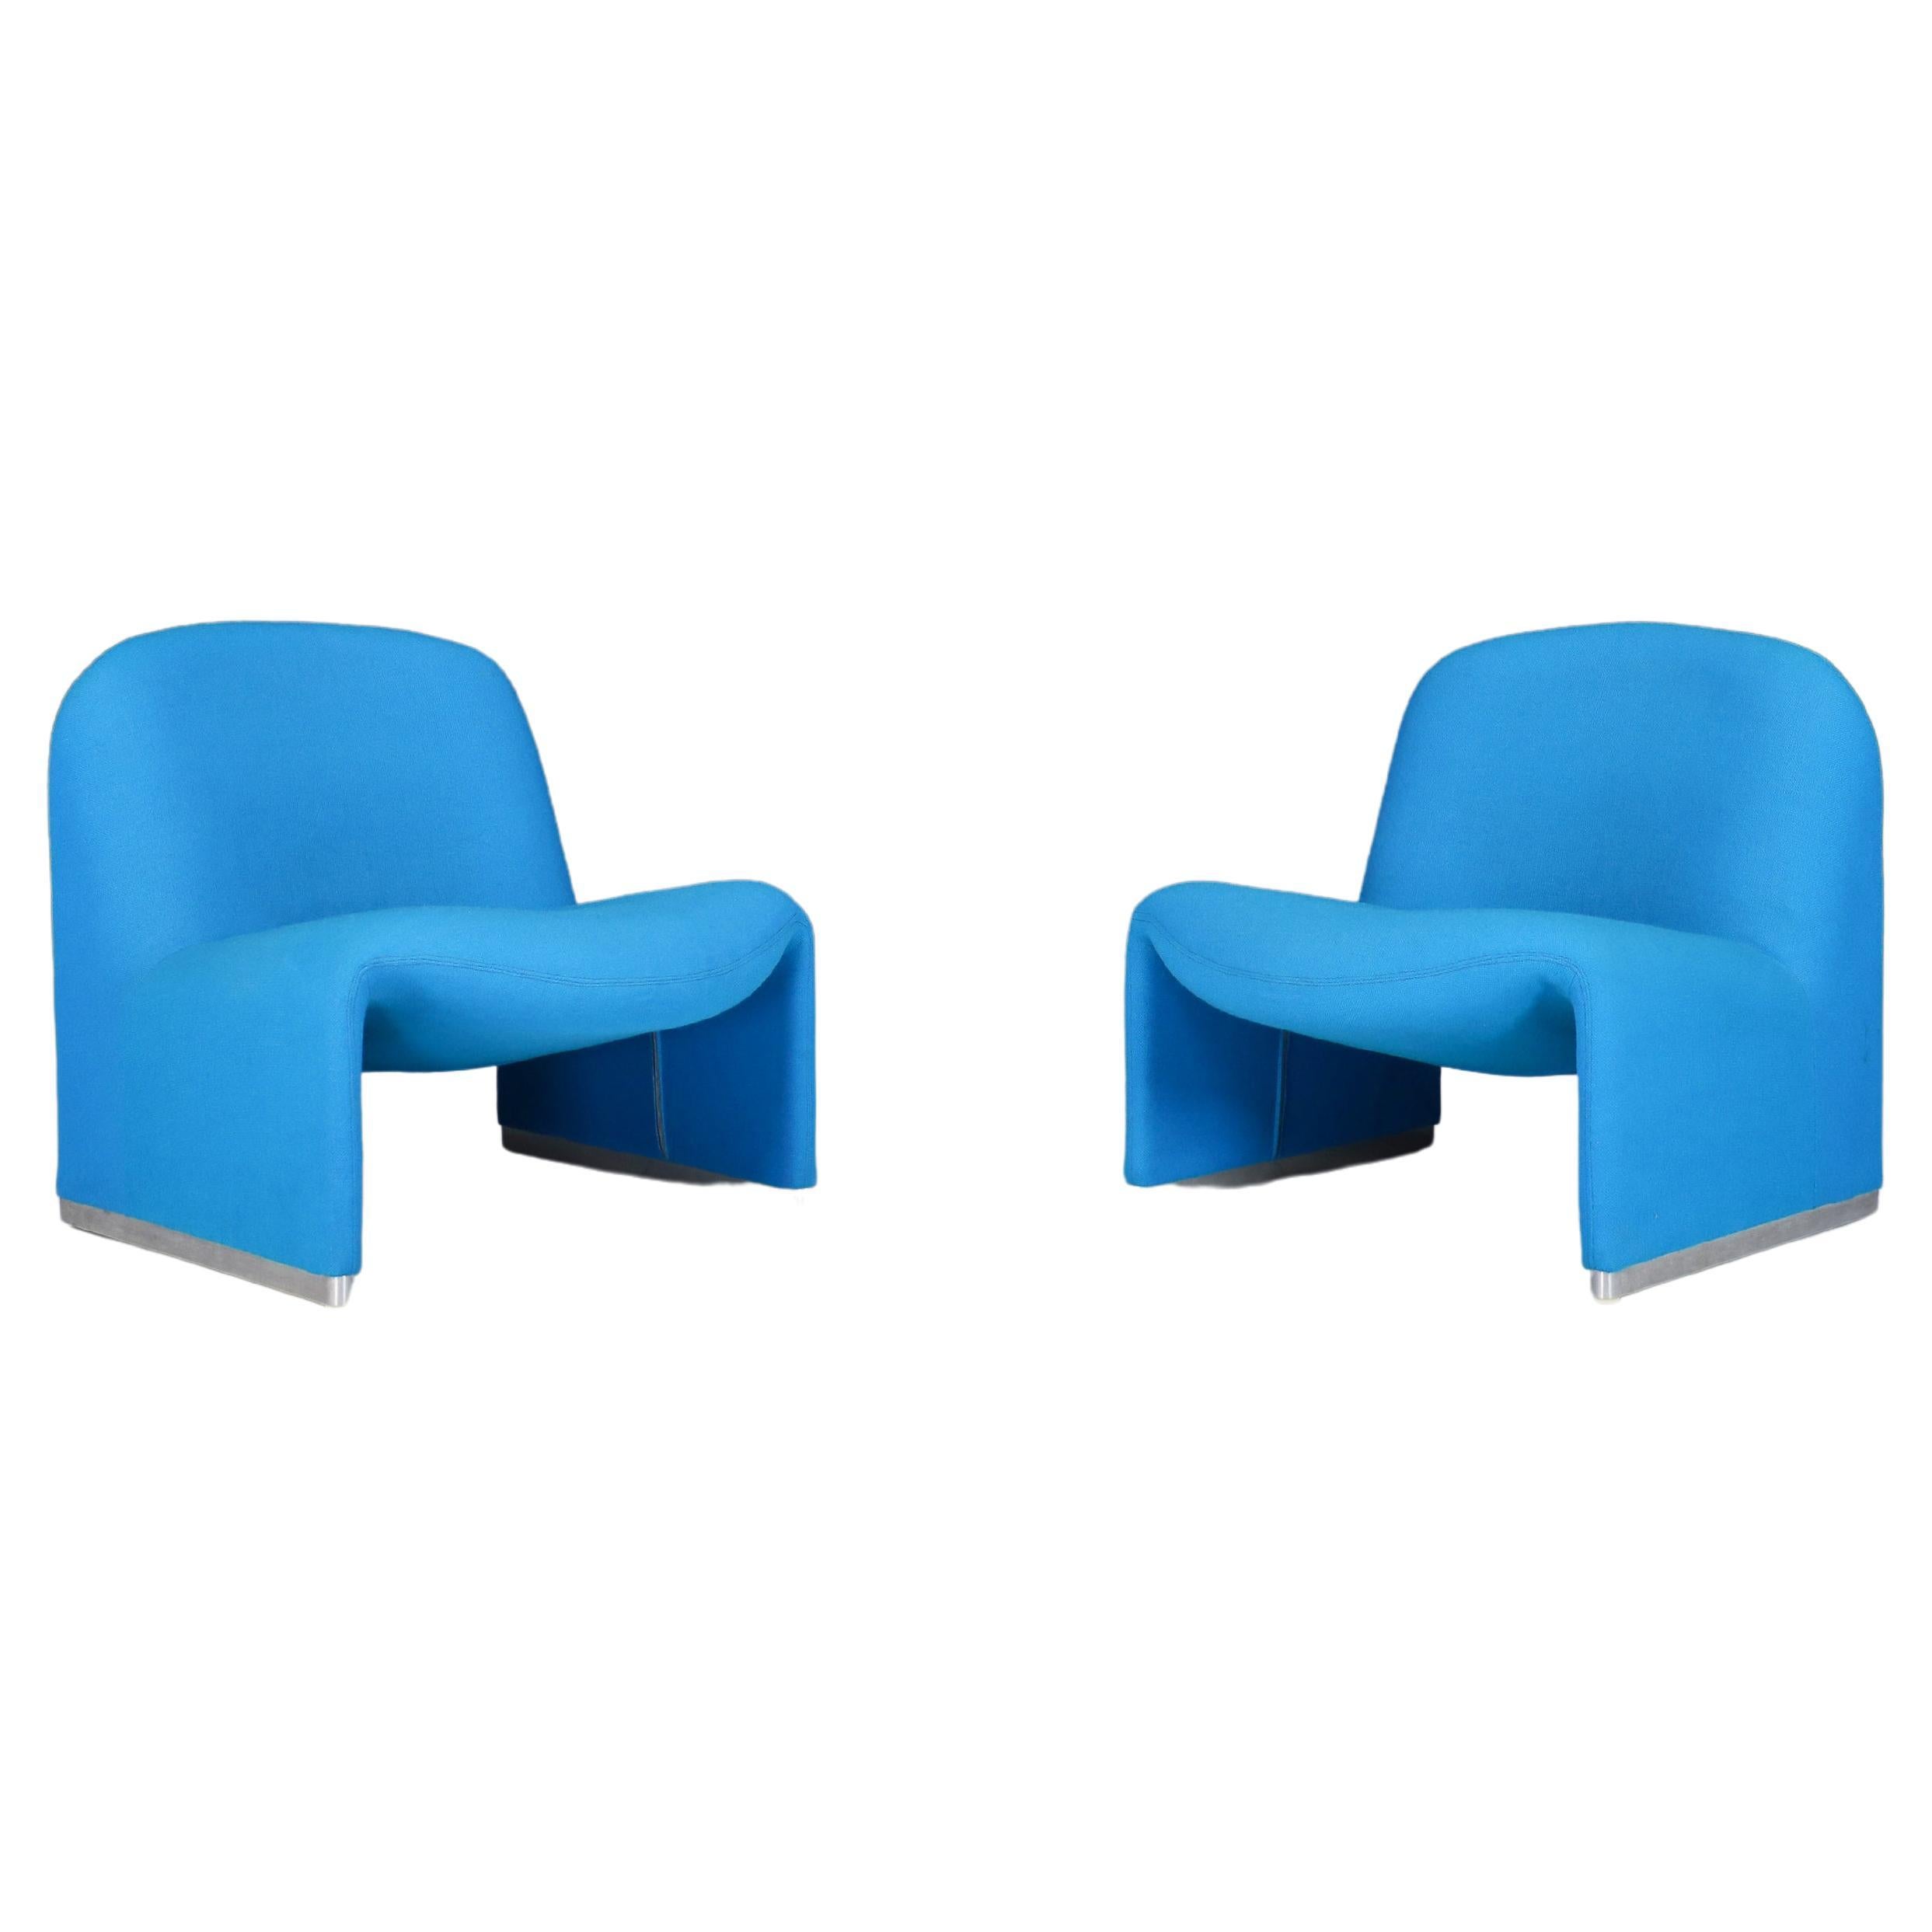 Giancarlo Piretti Alky Chairs in Original Blue Upholstery, Italy 1969